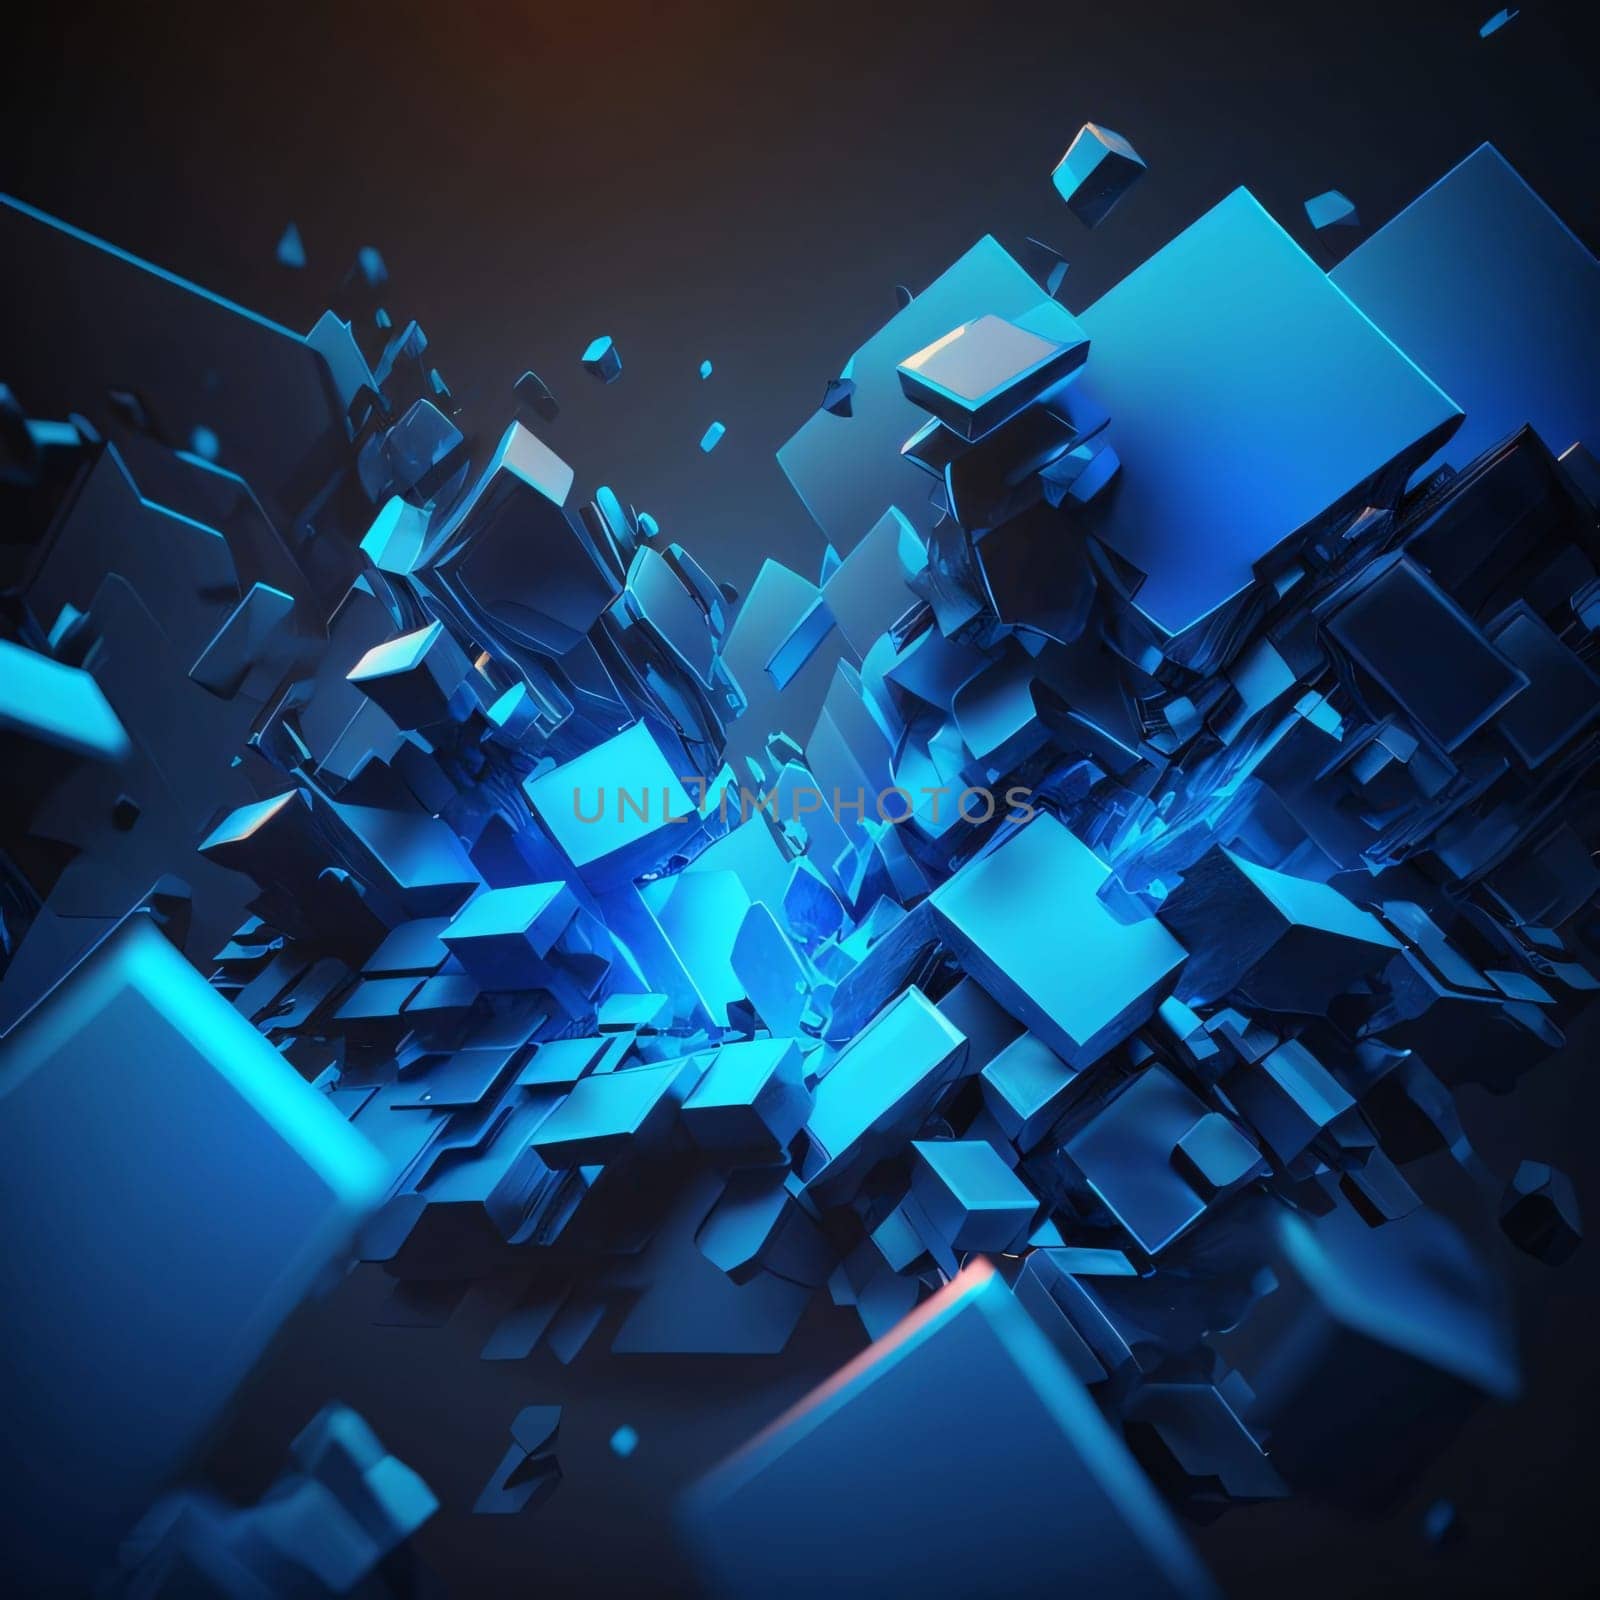 Abstract background design: Abstract 3d rendering of chaotic shape. Futuristic background with cubes.